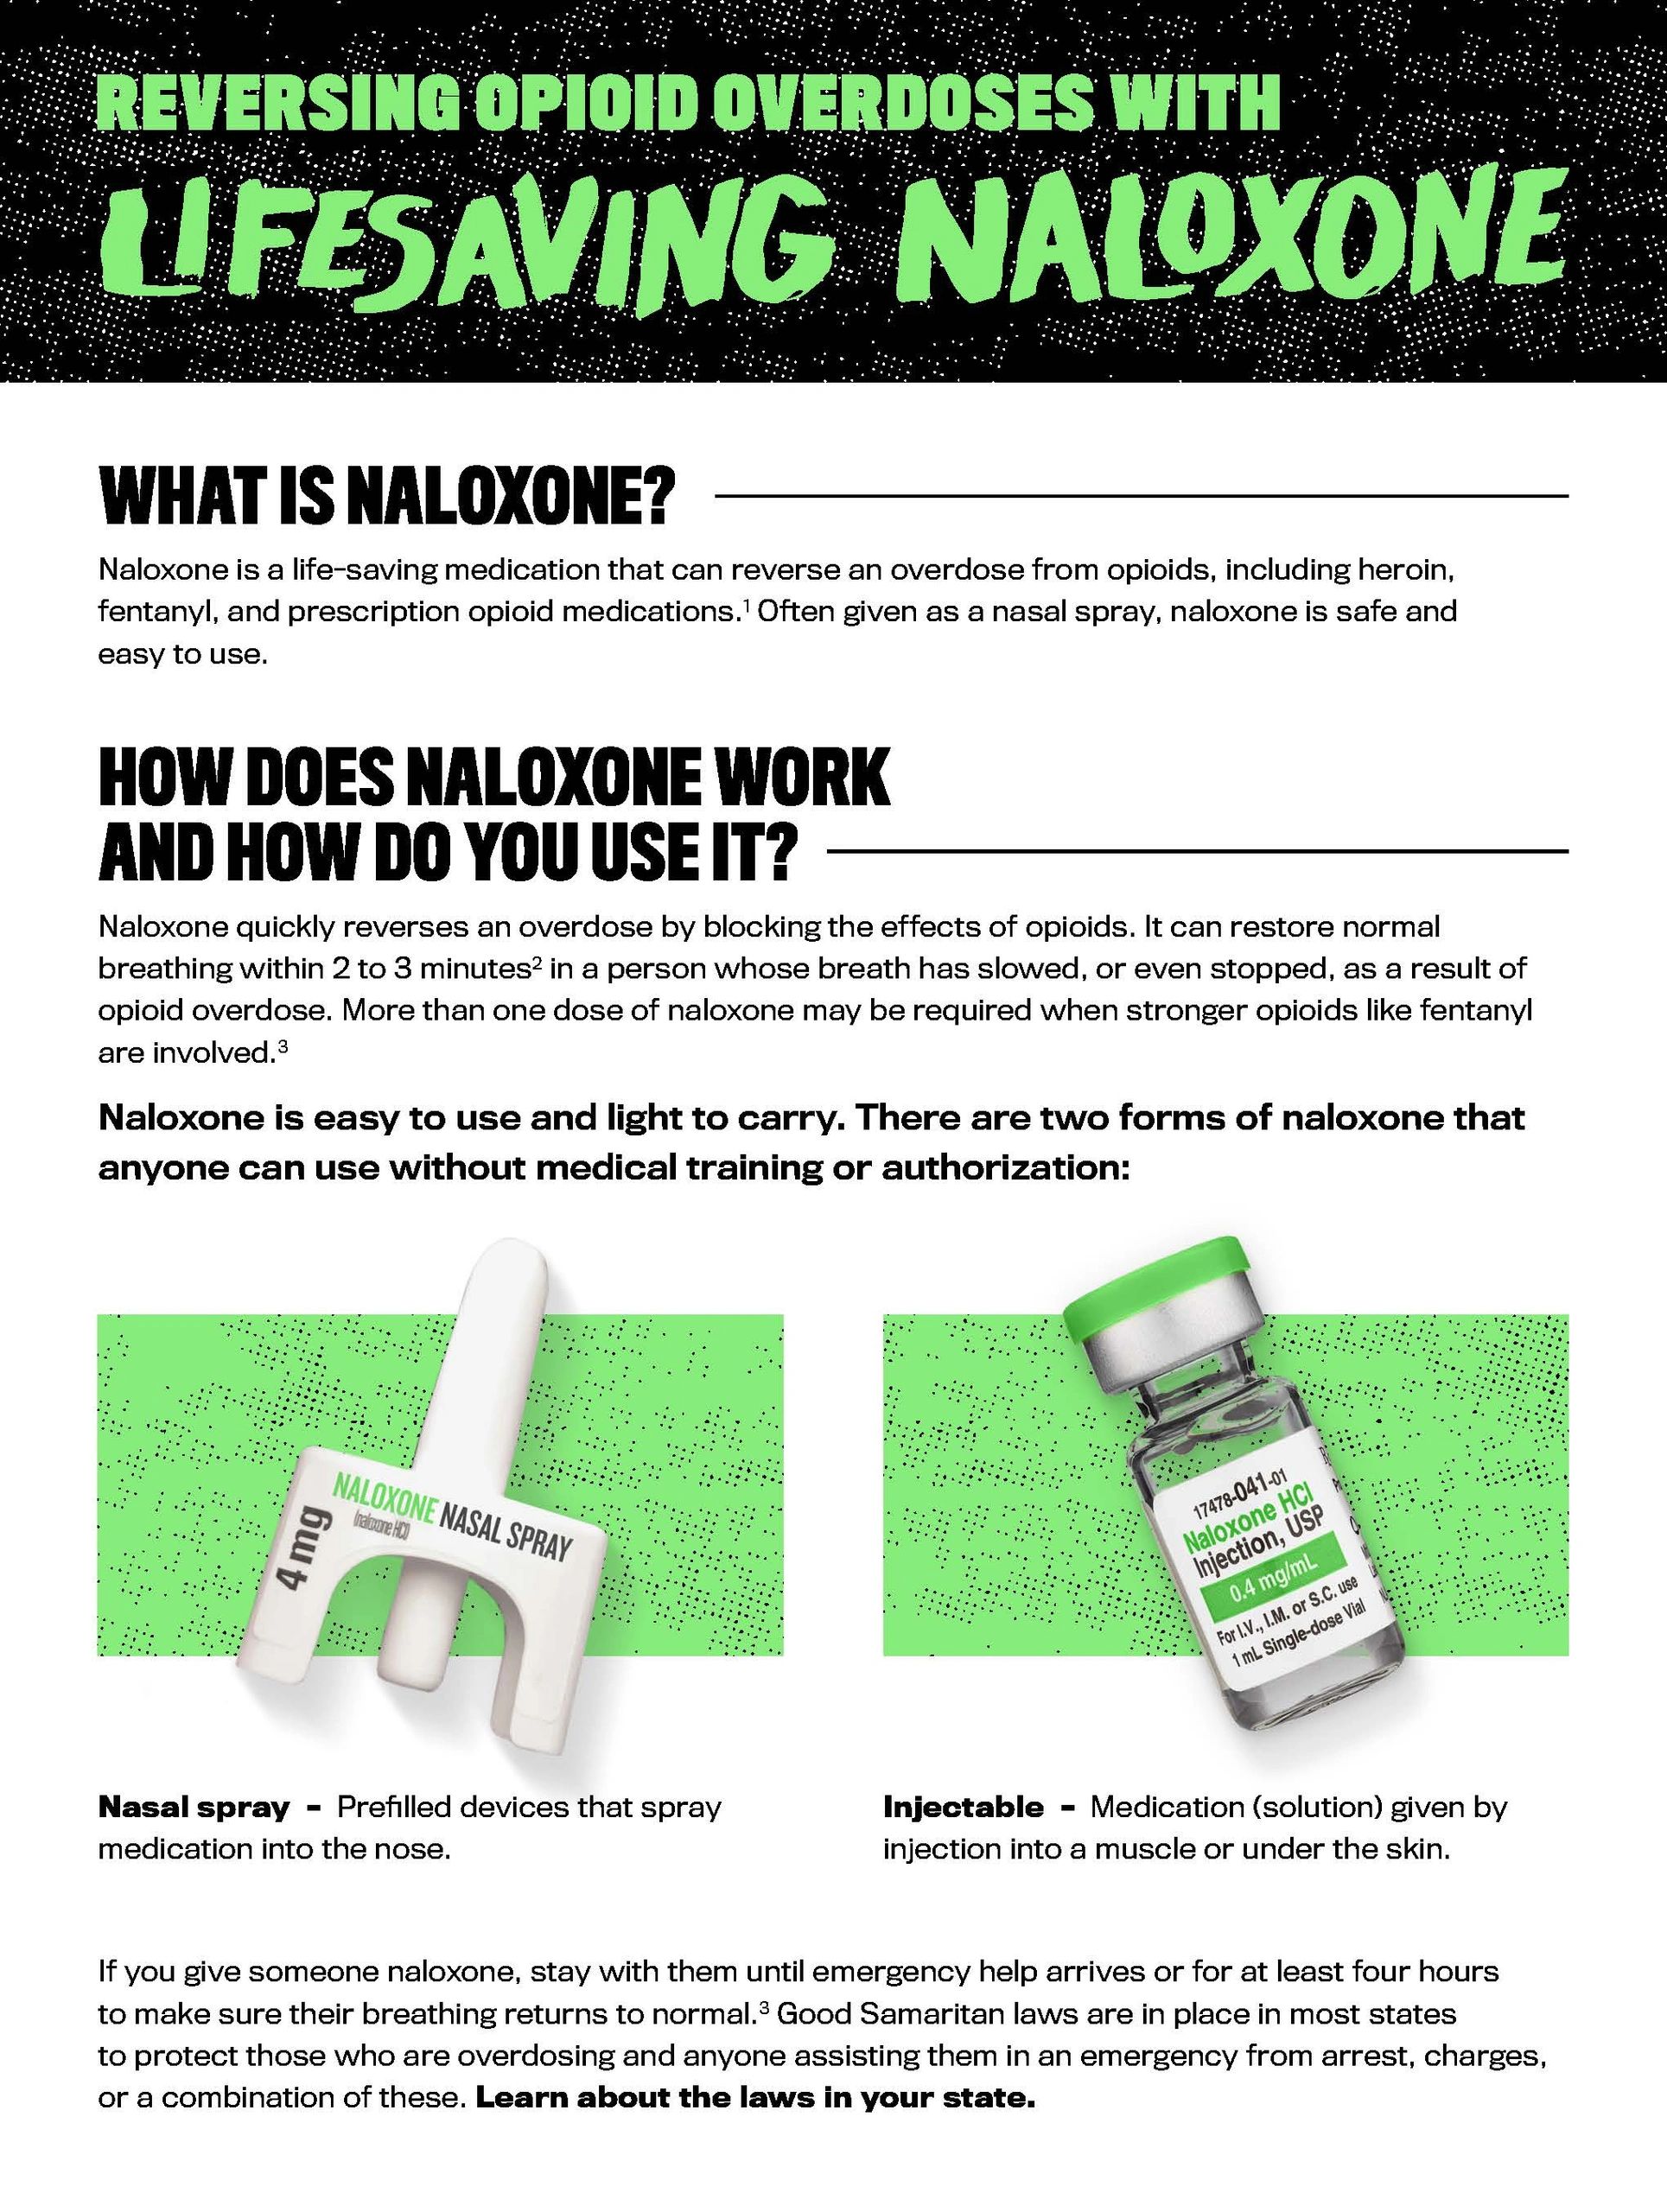 Reversing Opoioid Overdoses with Lifesaving Naloxone - a fact sheet from the CDC. 